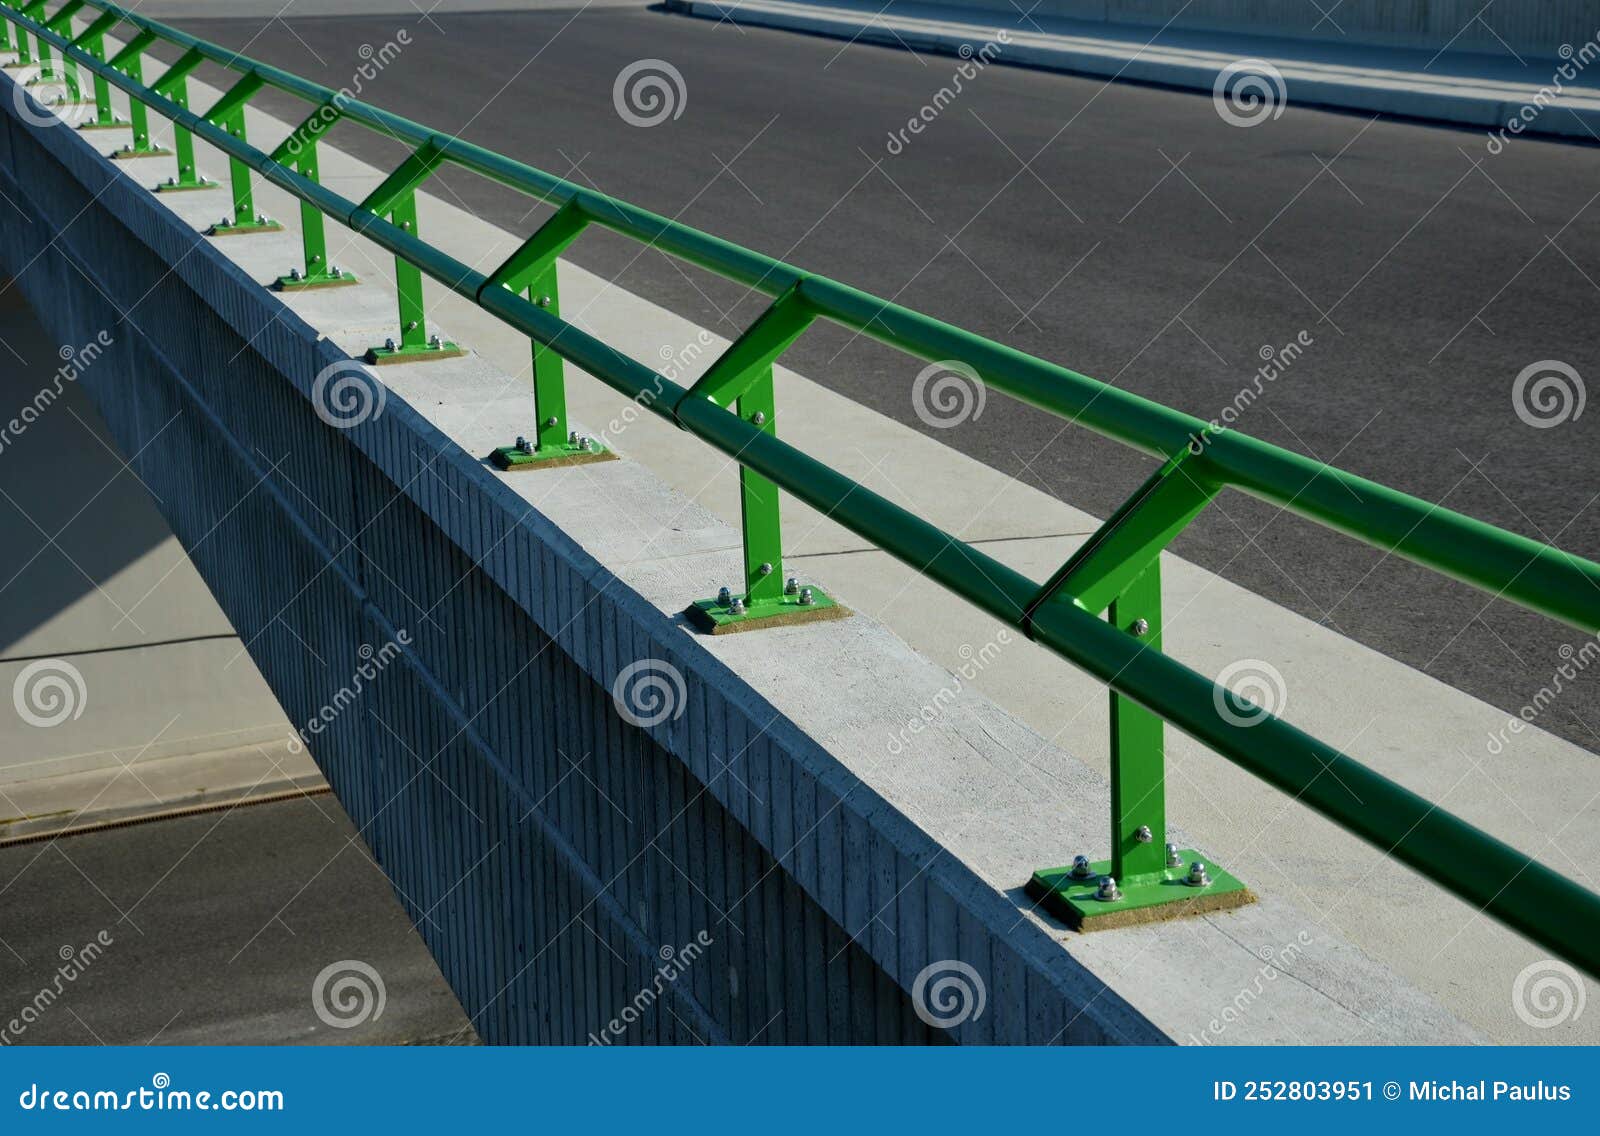 Roof Structure or Bridge Expansion for Safe Connection of Two ...